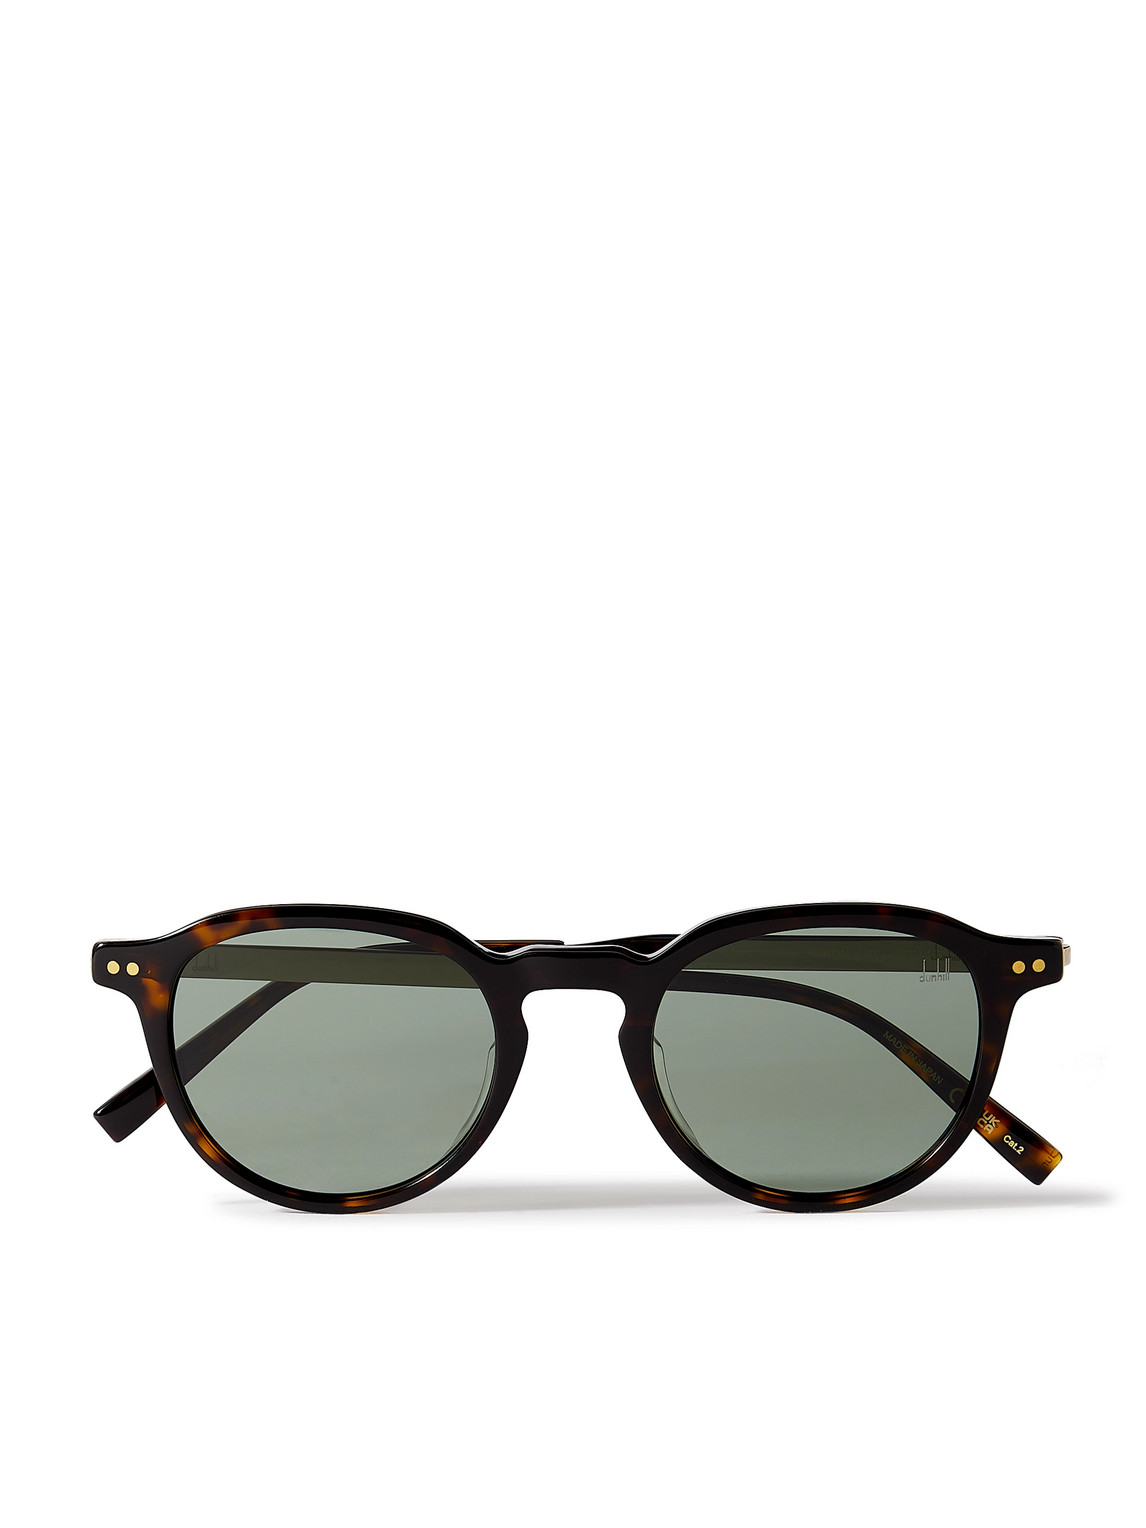 Dunhill Round-frame Tortoiseshell Acetate And Gold-tone Sunglasses In Gray